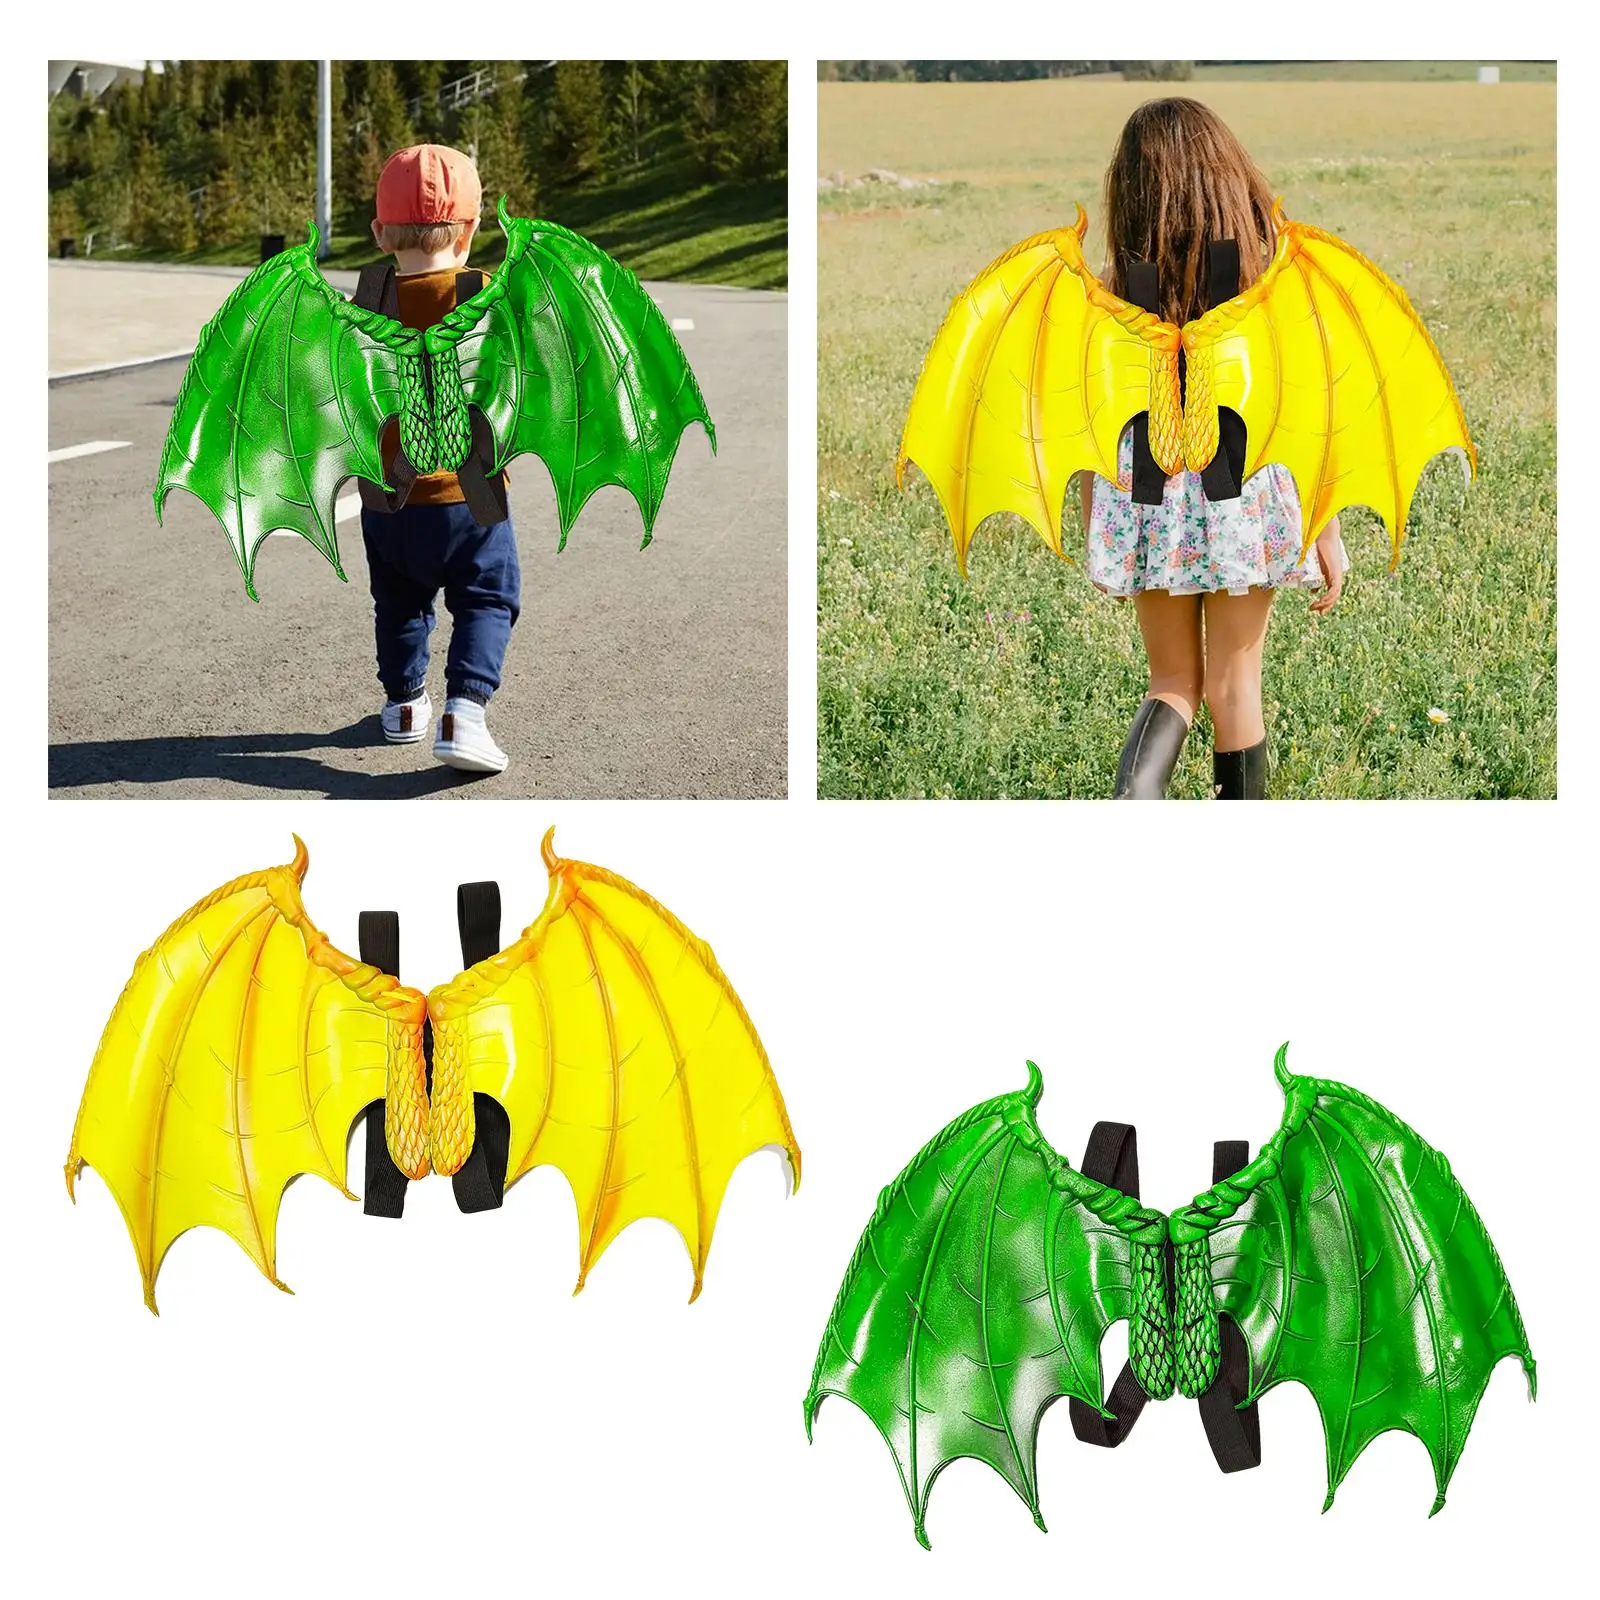 Dinosaur Wing Funny Cosplay Pretend Play Party Favors Dragon Costume Toy for Festival Nightclub Carnival Dancing Party Children